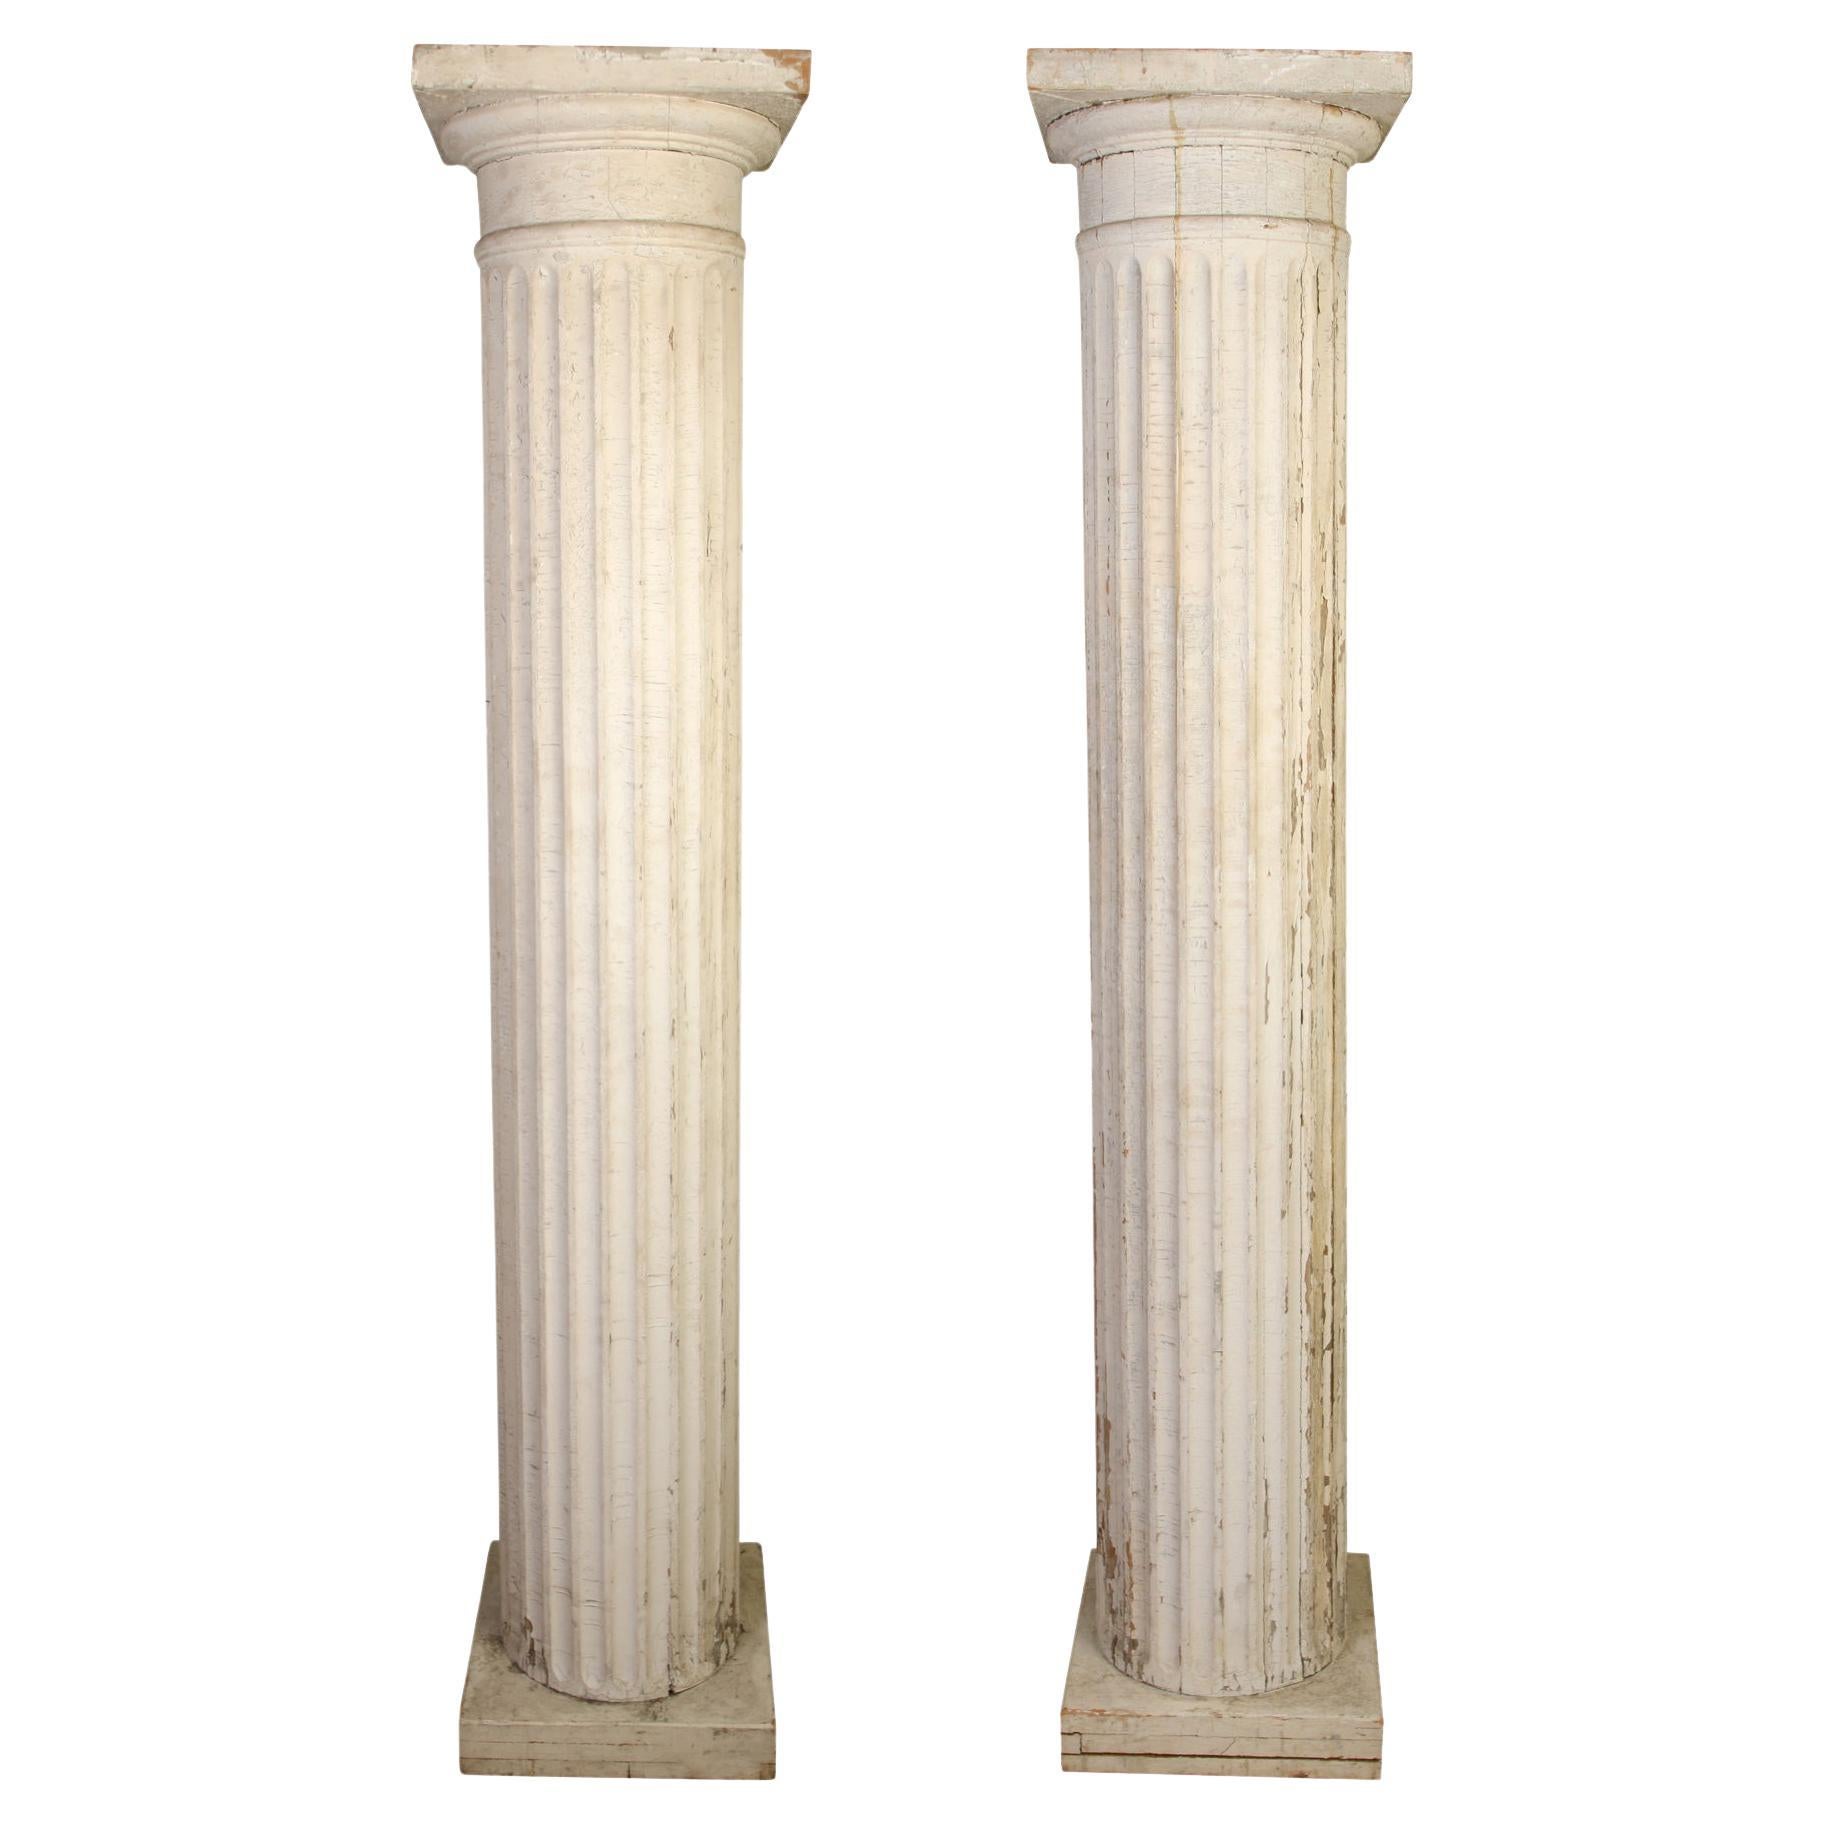 Antique Pair of Carved and Fluted Painted Wood Columns